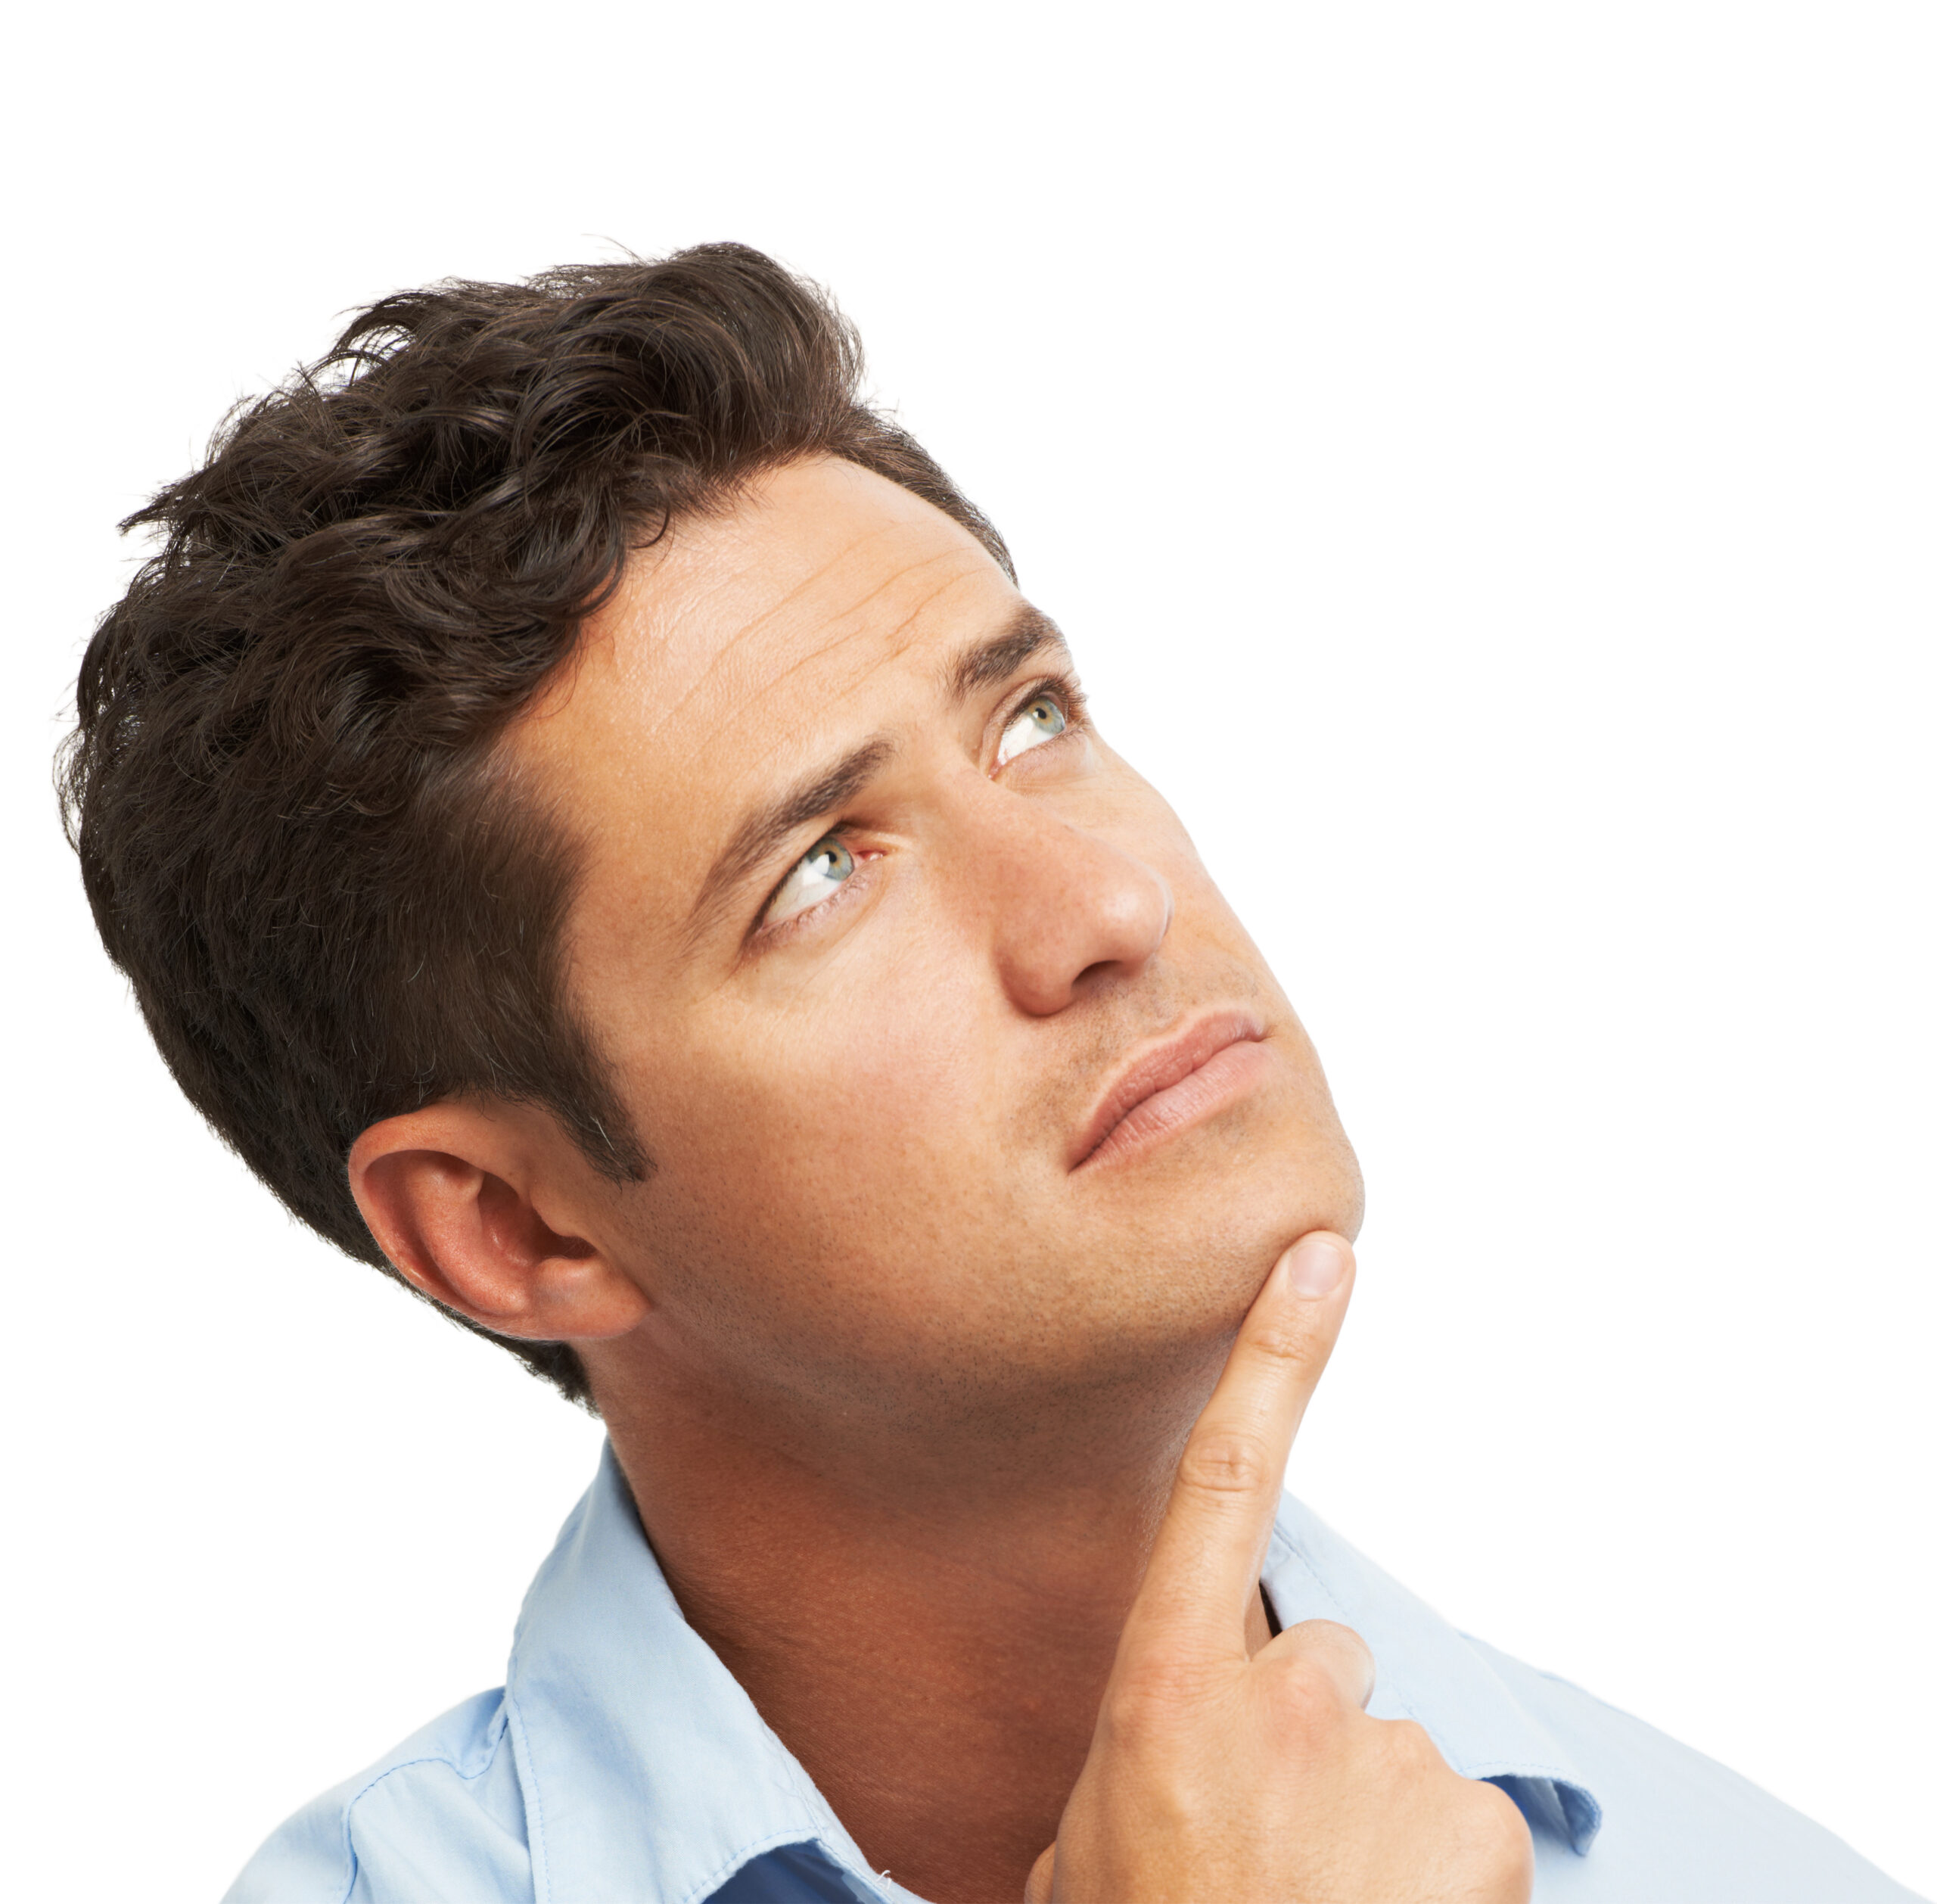 A young man looking upwards thoughtfully while isolated on white